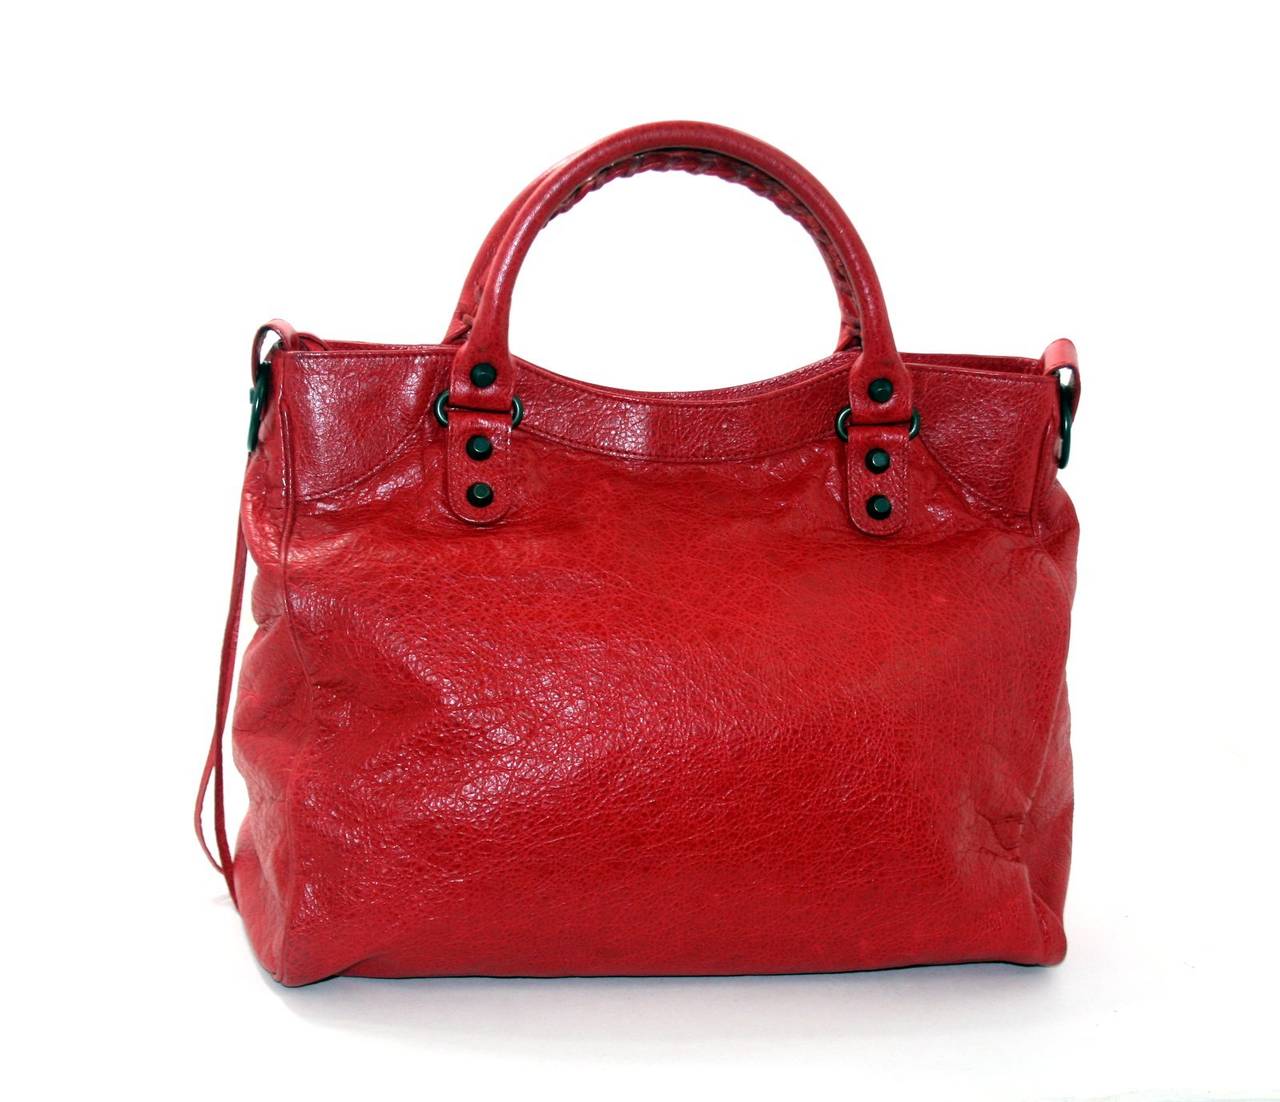 Balenciaga’s Coquelicot Red Arena Classic Velo Bag is a brilliant find in mint condition.  Balenciaga bags are known and loved for their vivid color palettes and moto inspired details.  This eye catching red version is a beautiful addition to any